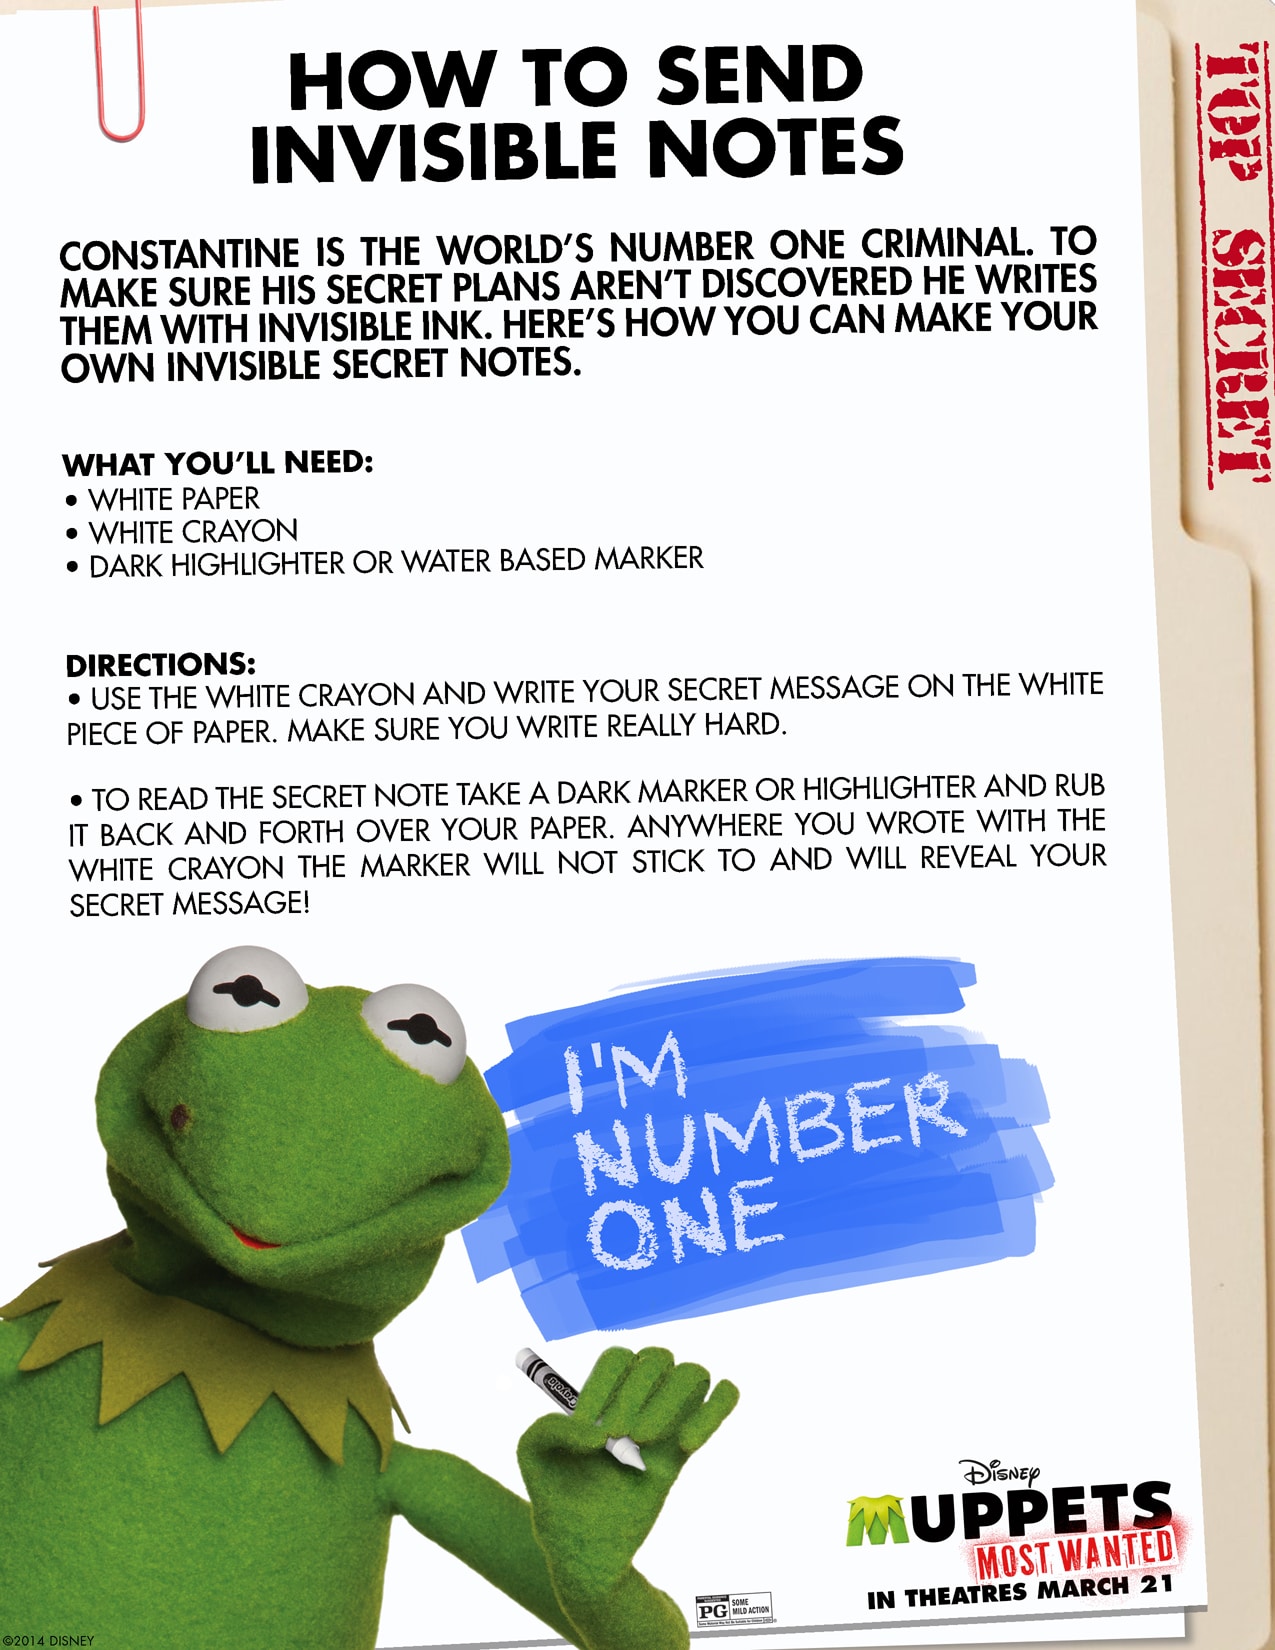 Disney's Muppets Most Wanted How to Send Invisible Notes